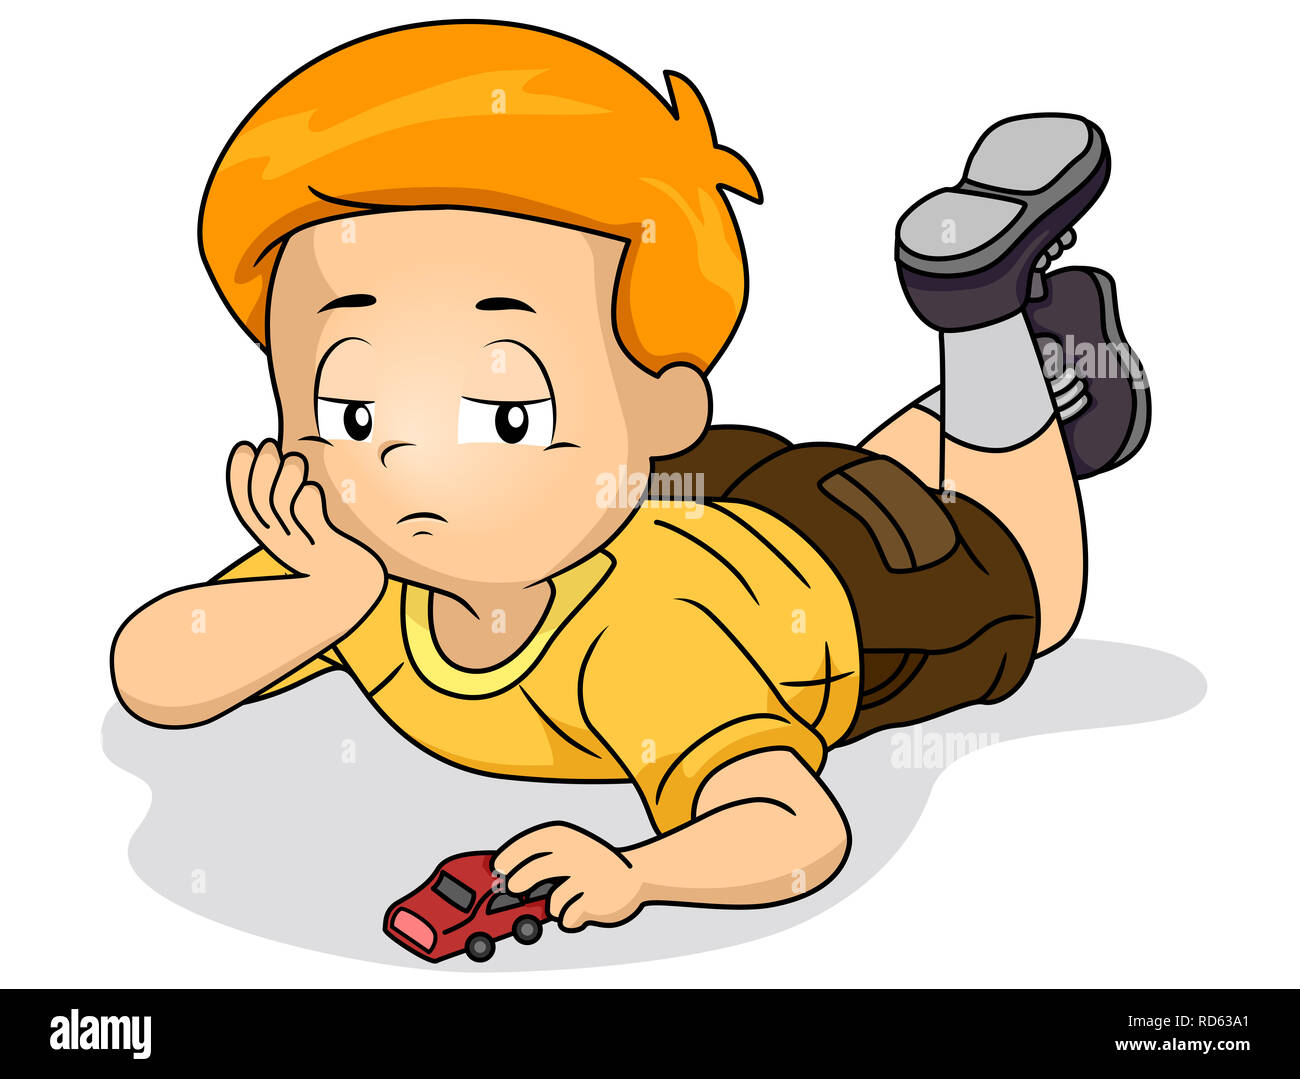 Illustration of a Bored Kid Boy Playing with Toy Car Stock Photo - Alamy